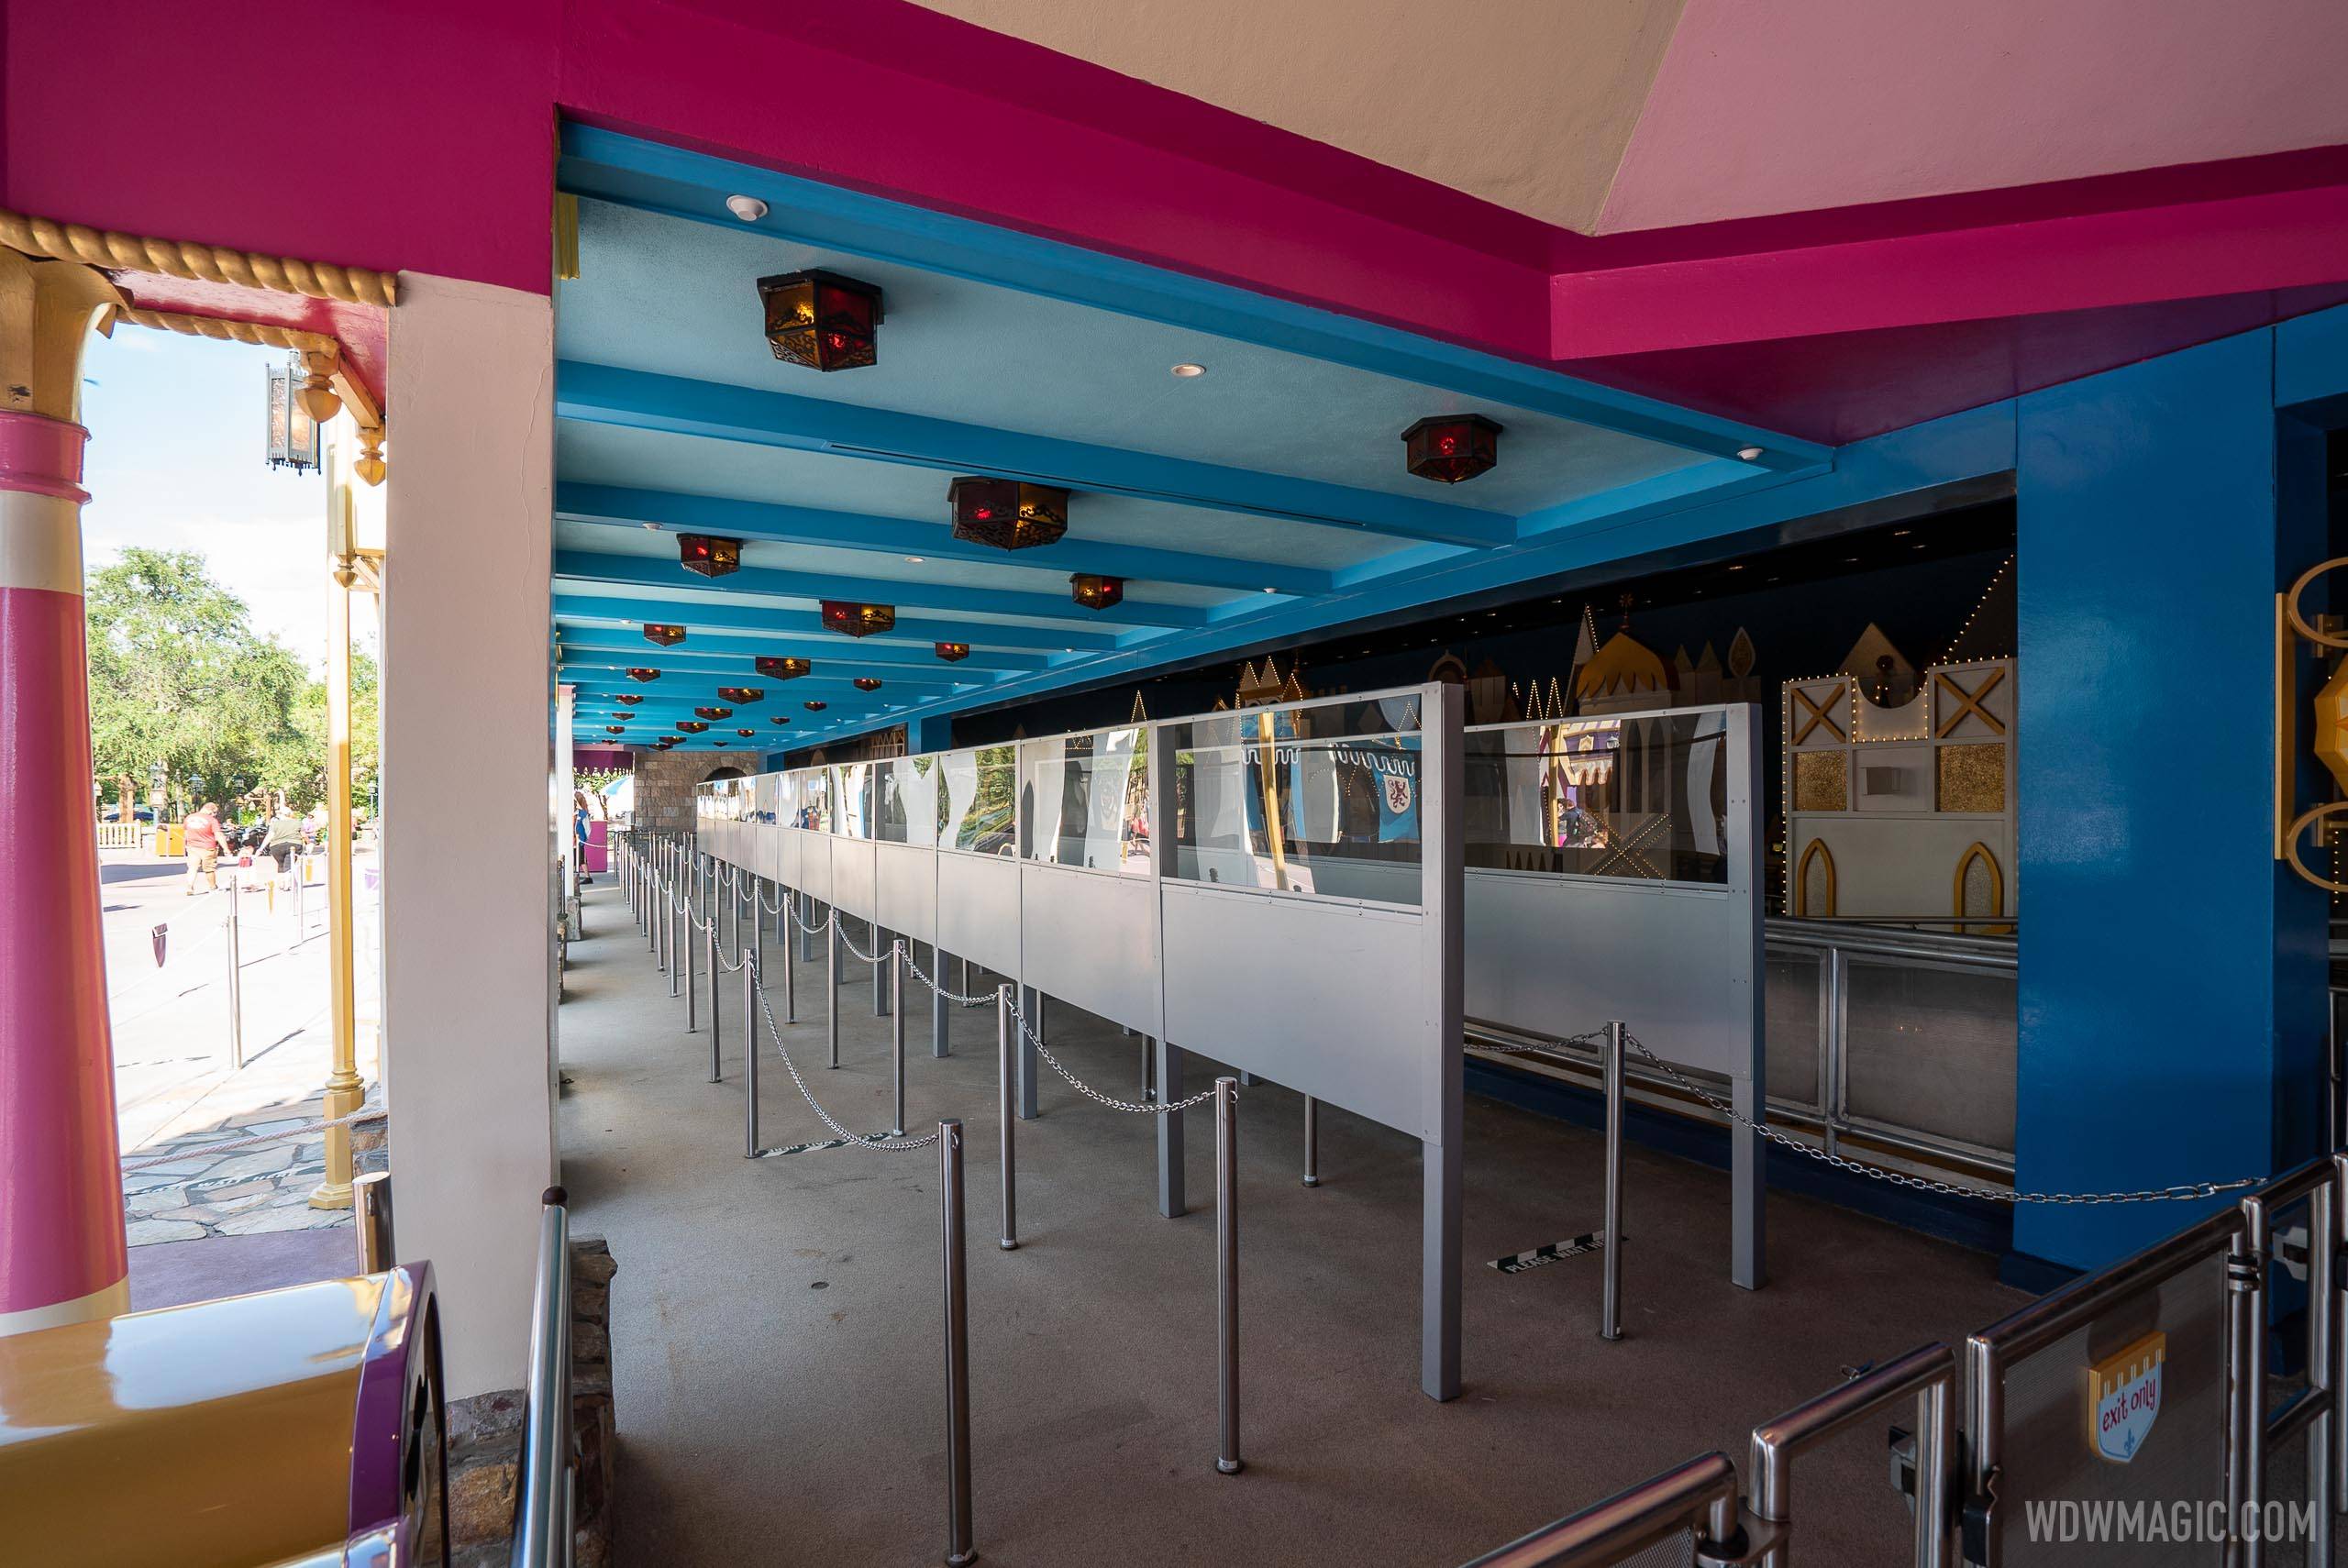 it's a small world queue refurbishment completed